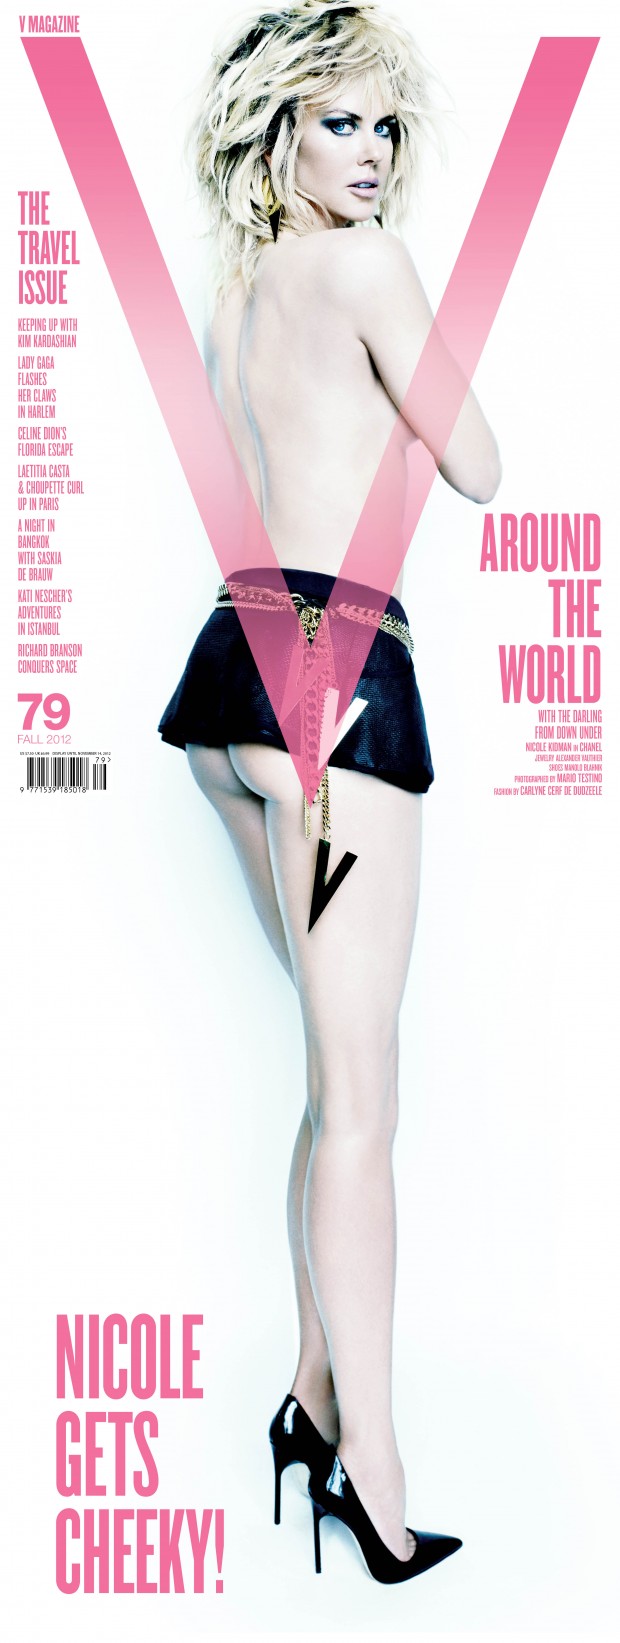 Nicole Kidman Exposes Buttcheeks on Cover of V